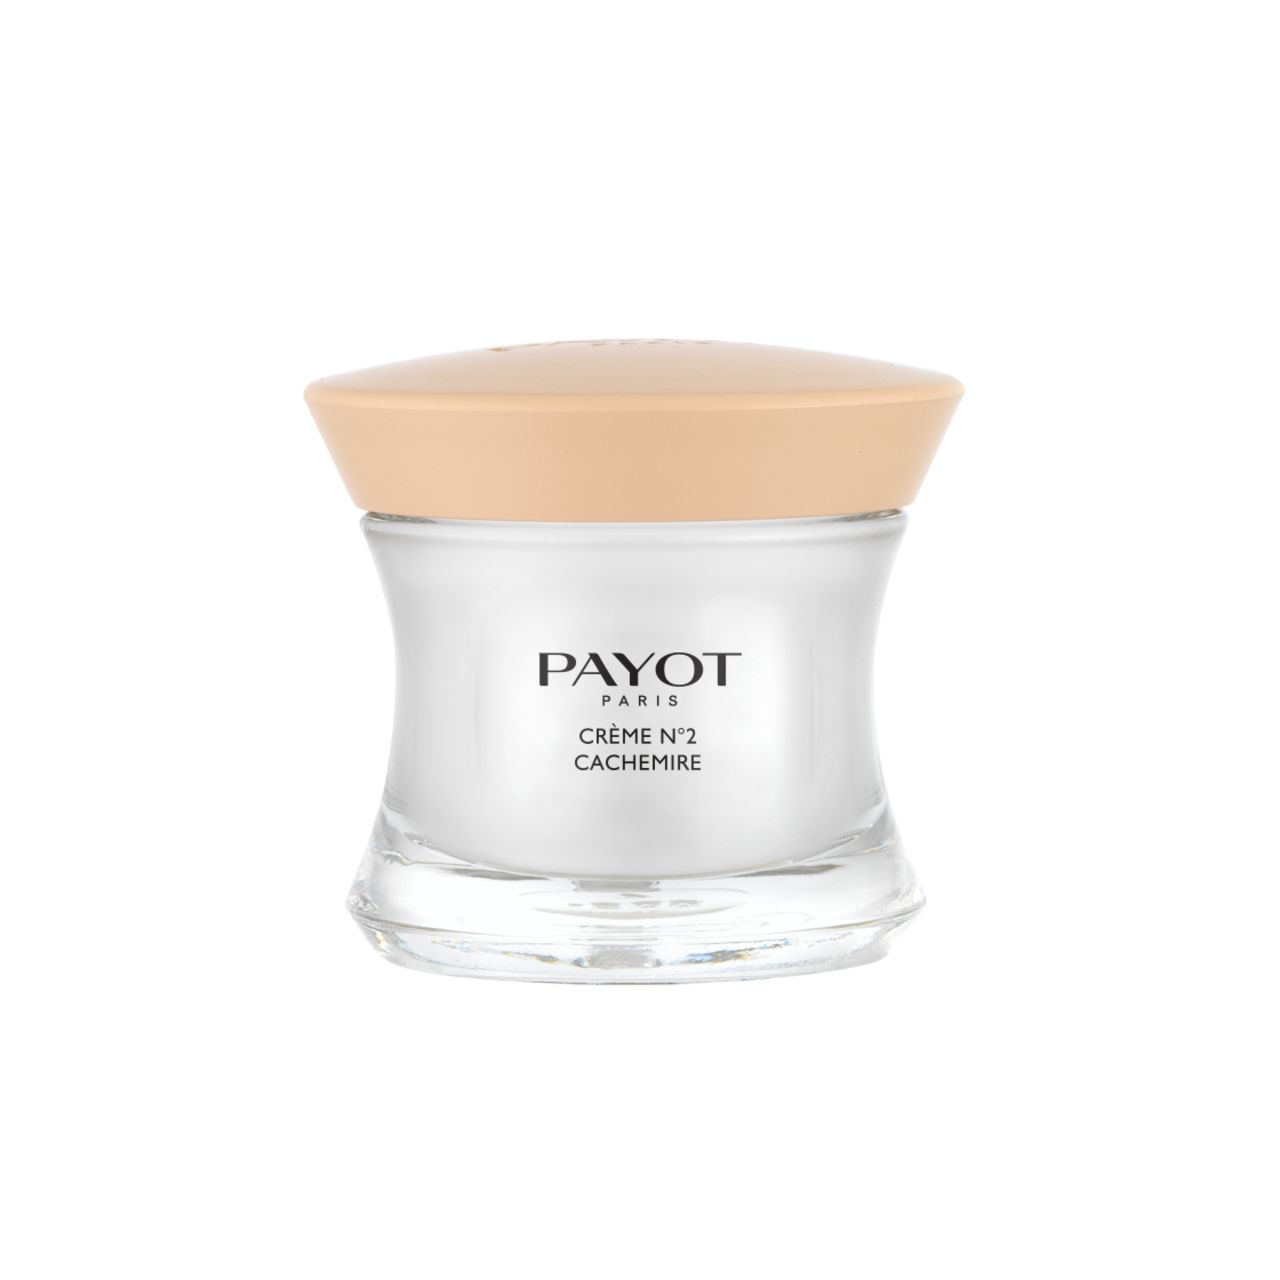 Payot, Creme N°2 Cachemire